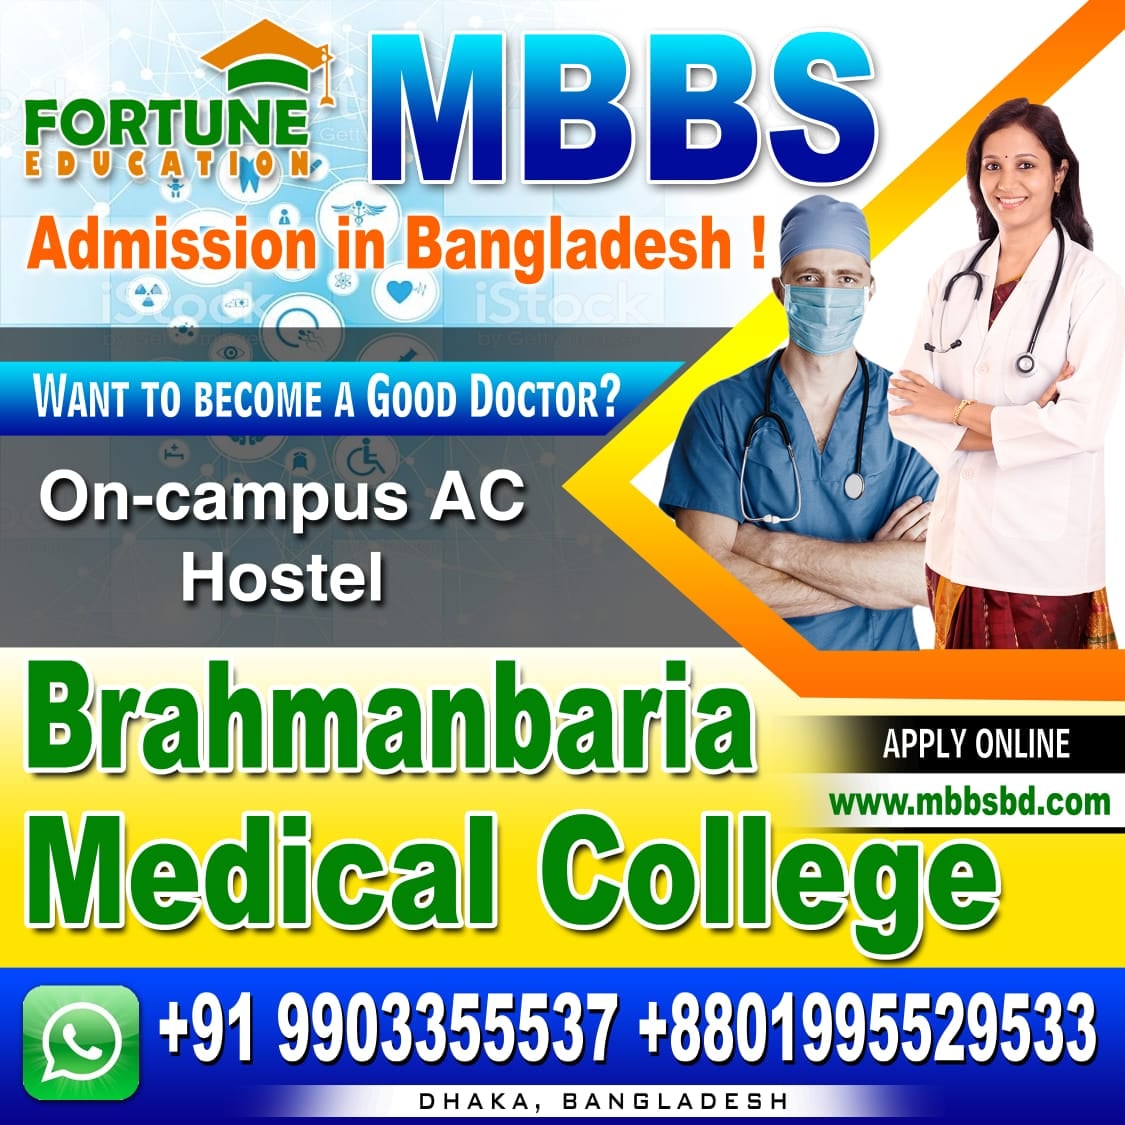 Your Gateway to Medical Education in Bangladesh